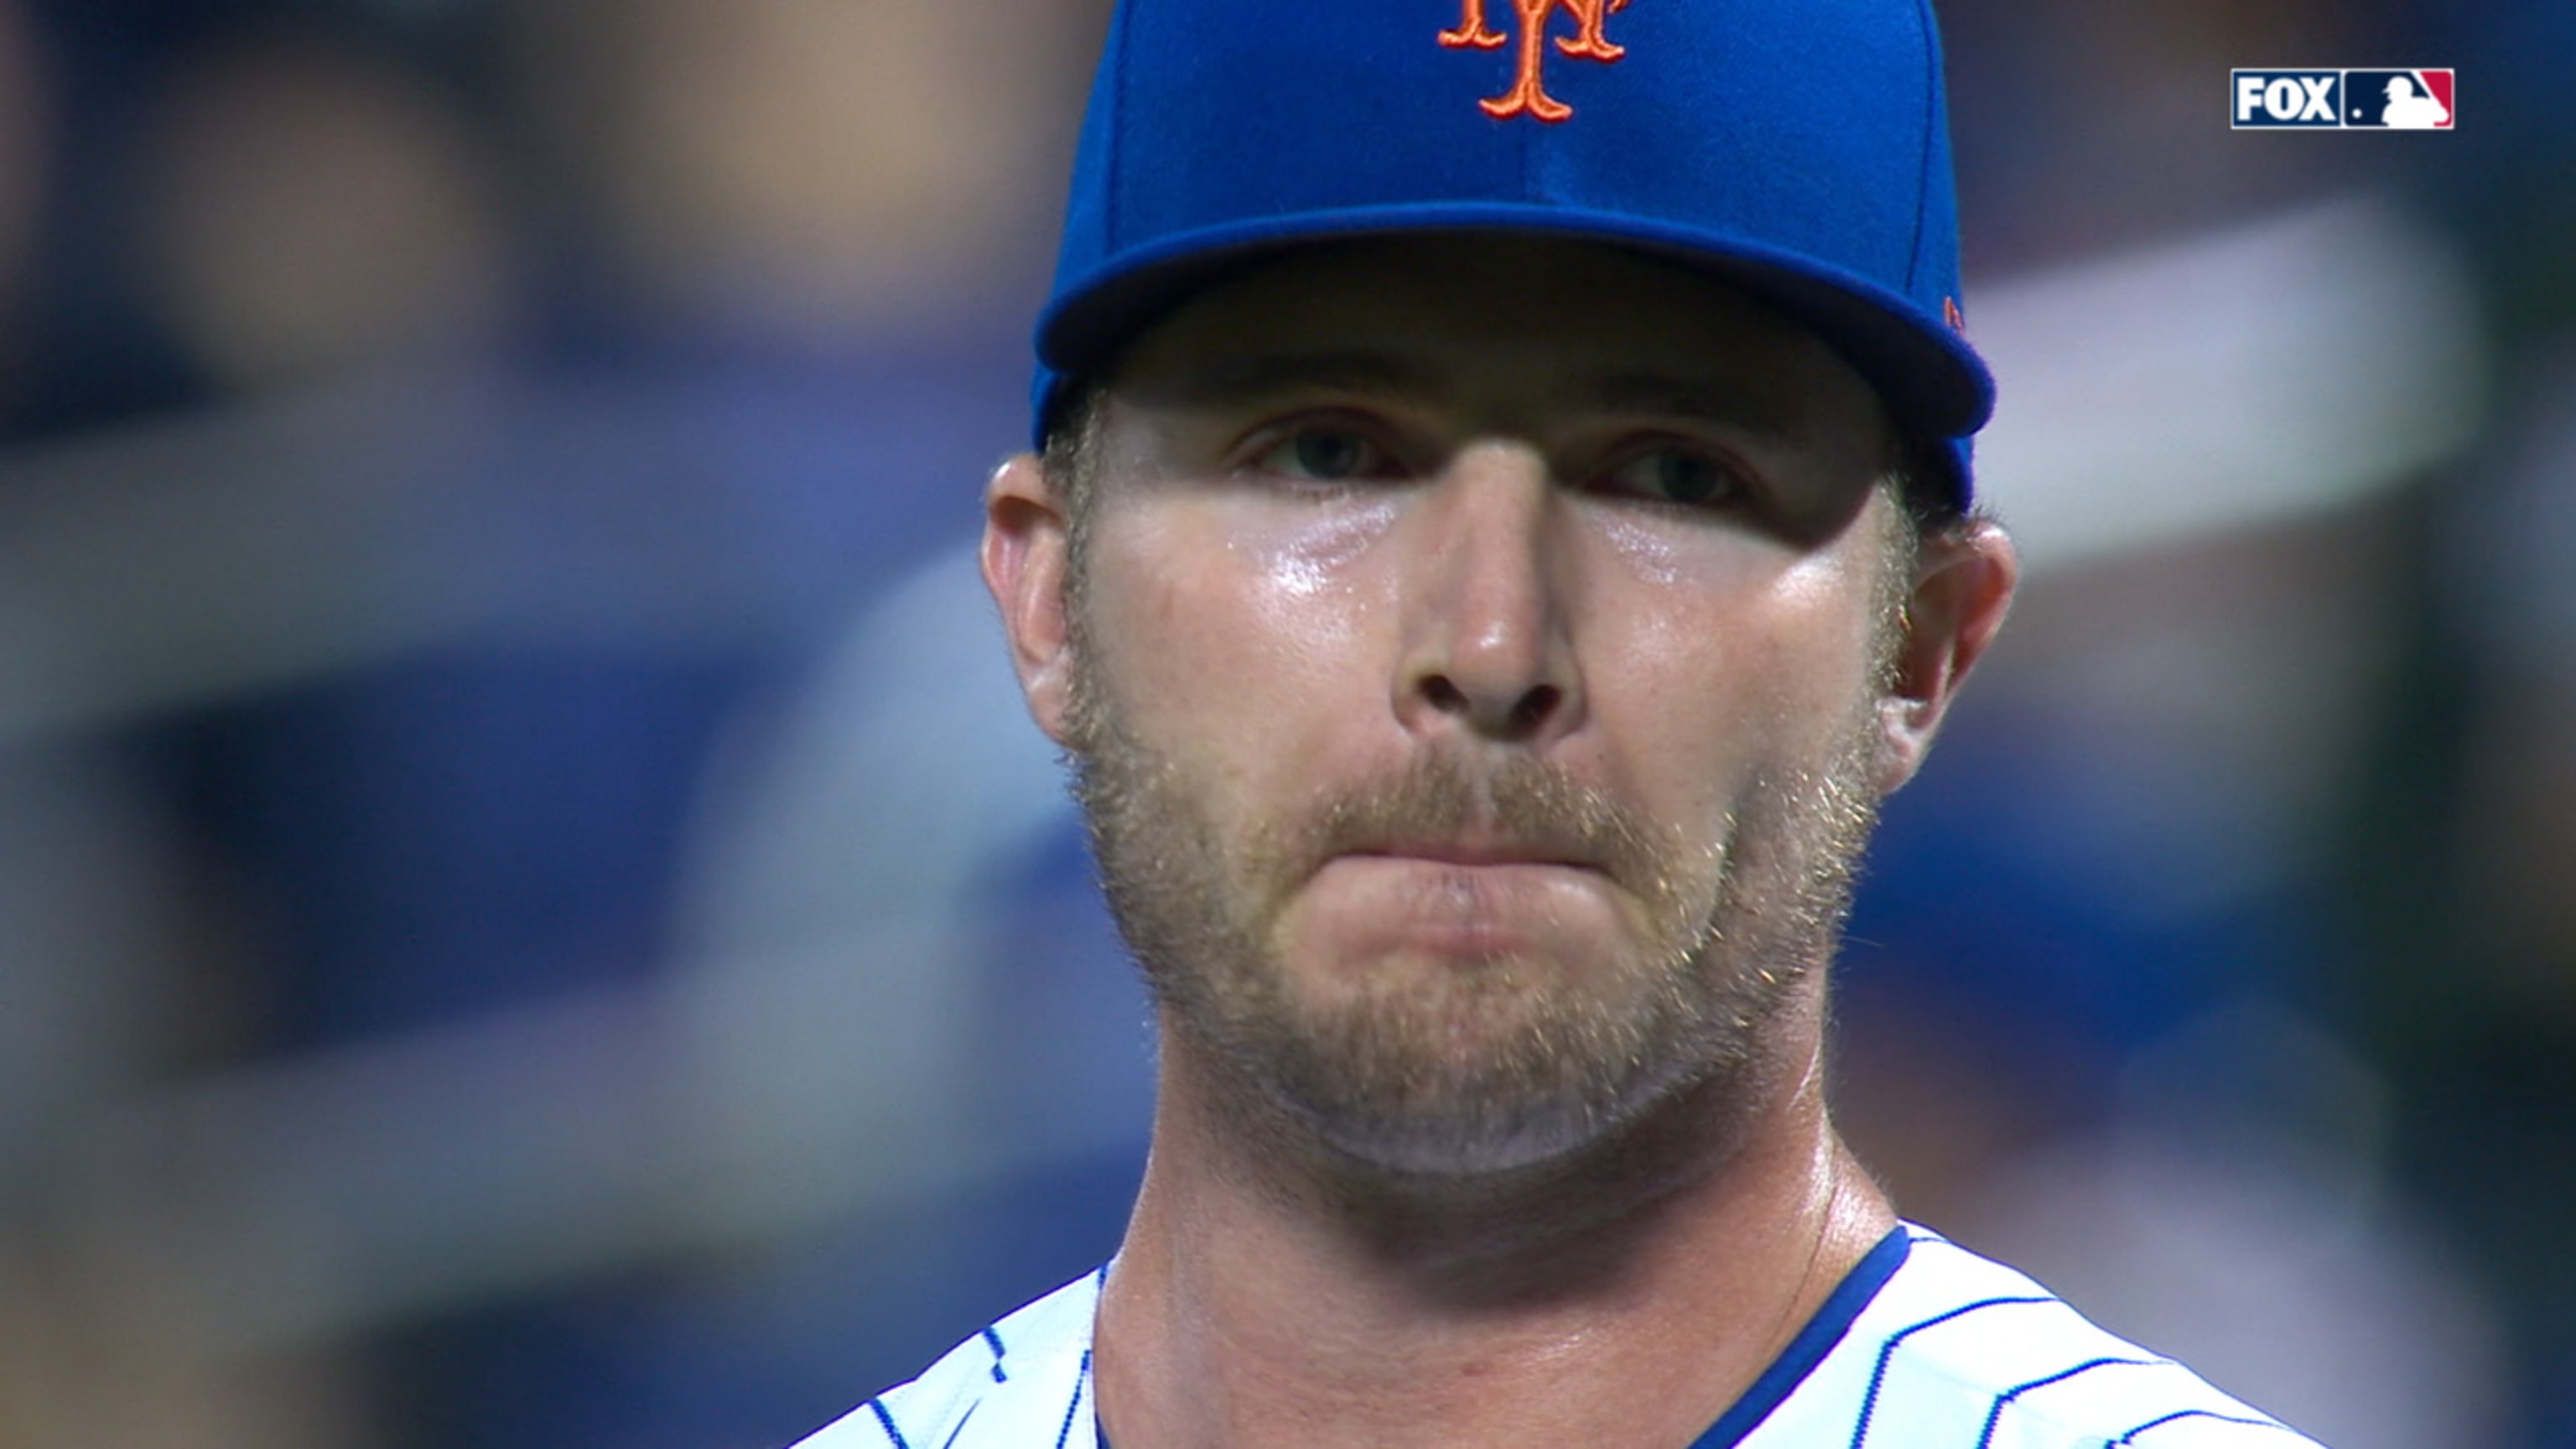 Mets' Pete Alonso drilled in face, exits against Nationals